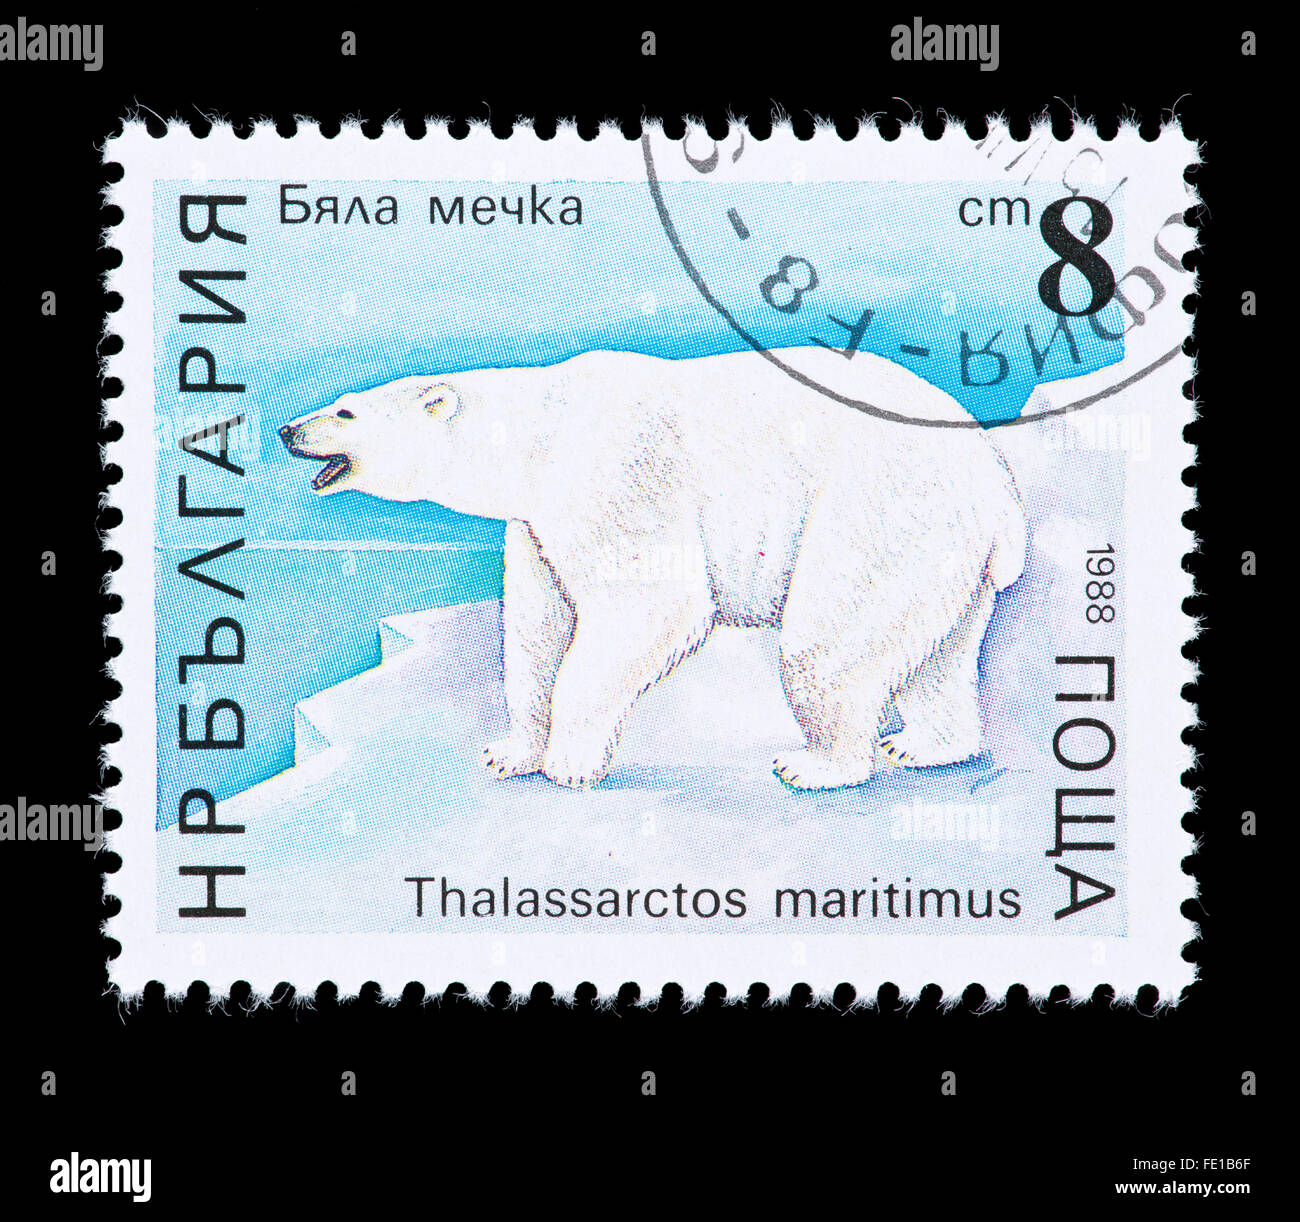 Postage stamp from Bulgaria depicting a  polar bear (Ursus maritimus) on an ice floe. Stock Photo